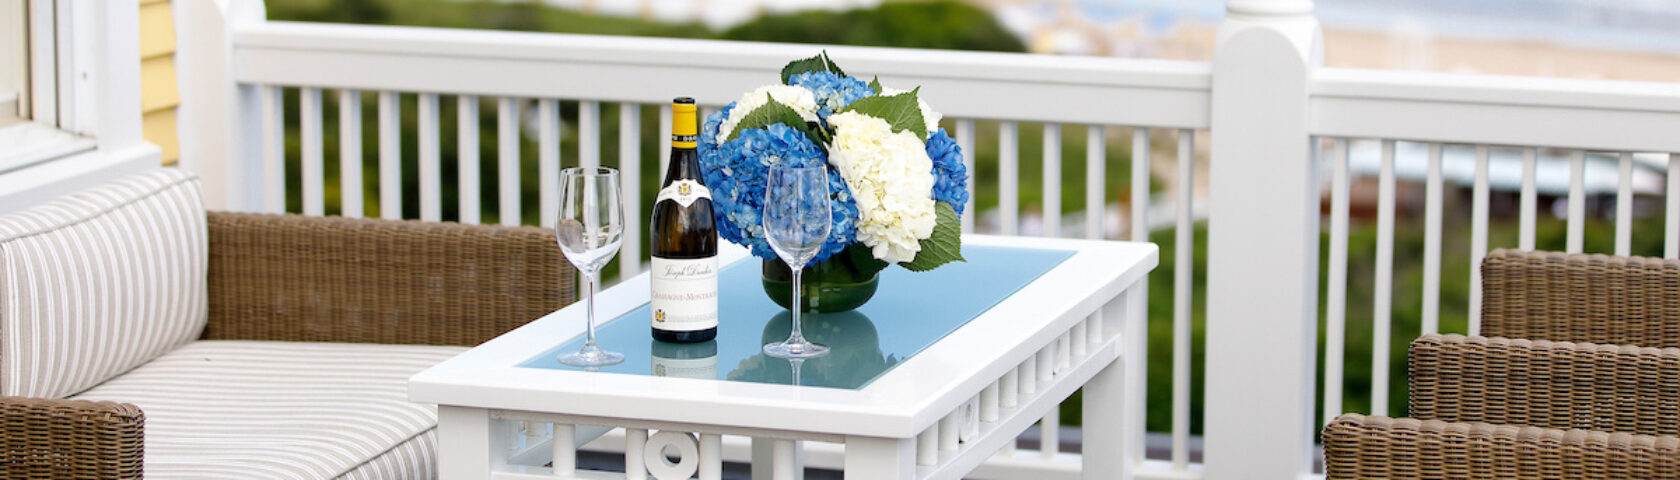 An outdoor lounge area set with flowers and champagne.